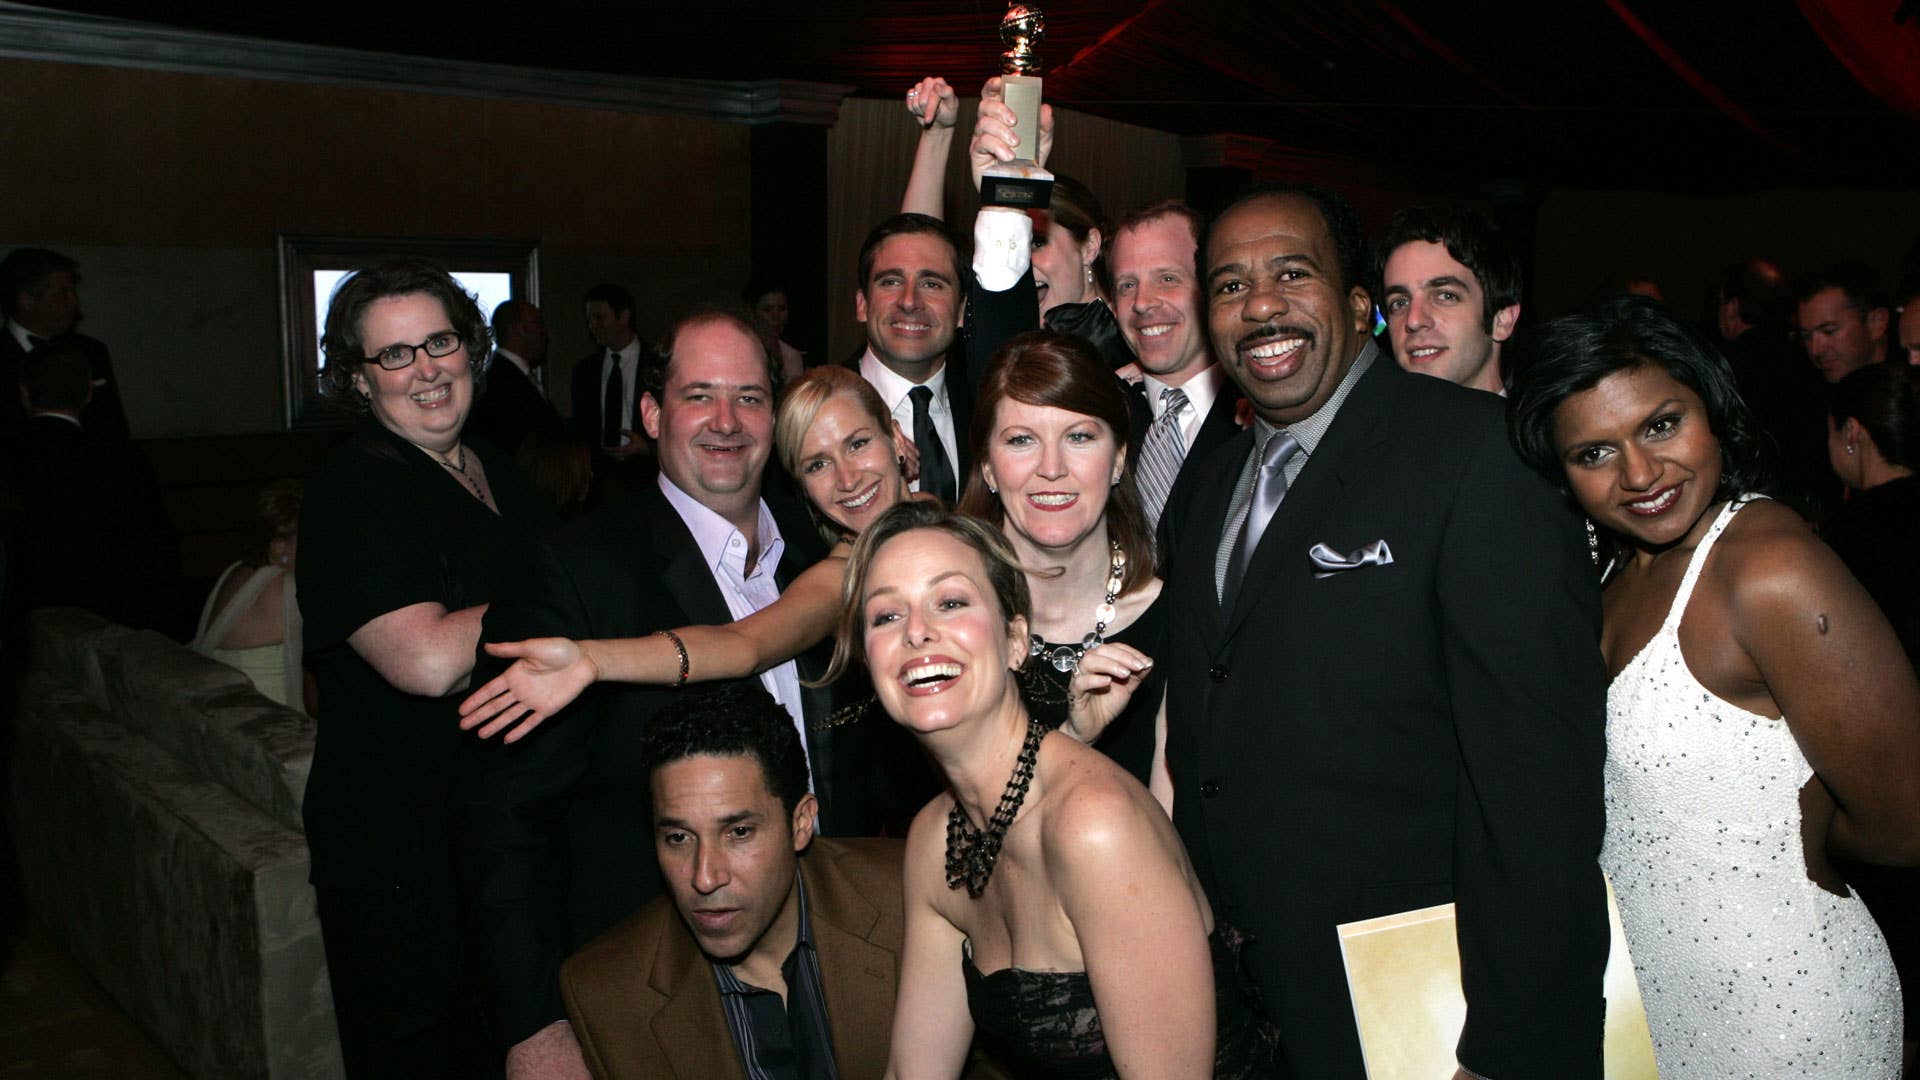 The cast of 'The Office' at a 2006 Golden Globes after party.